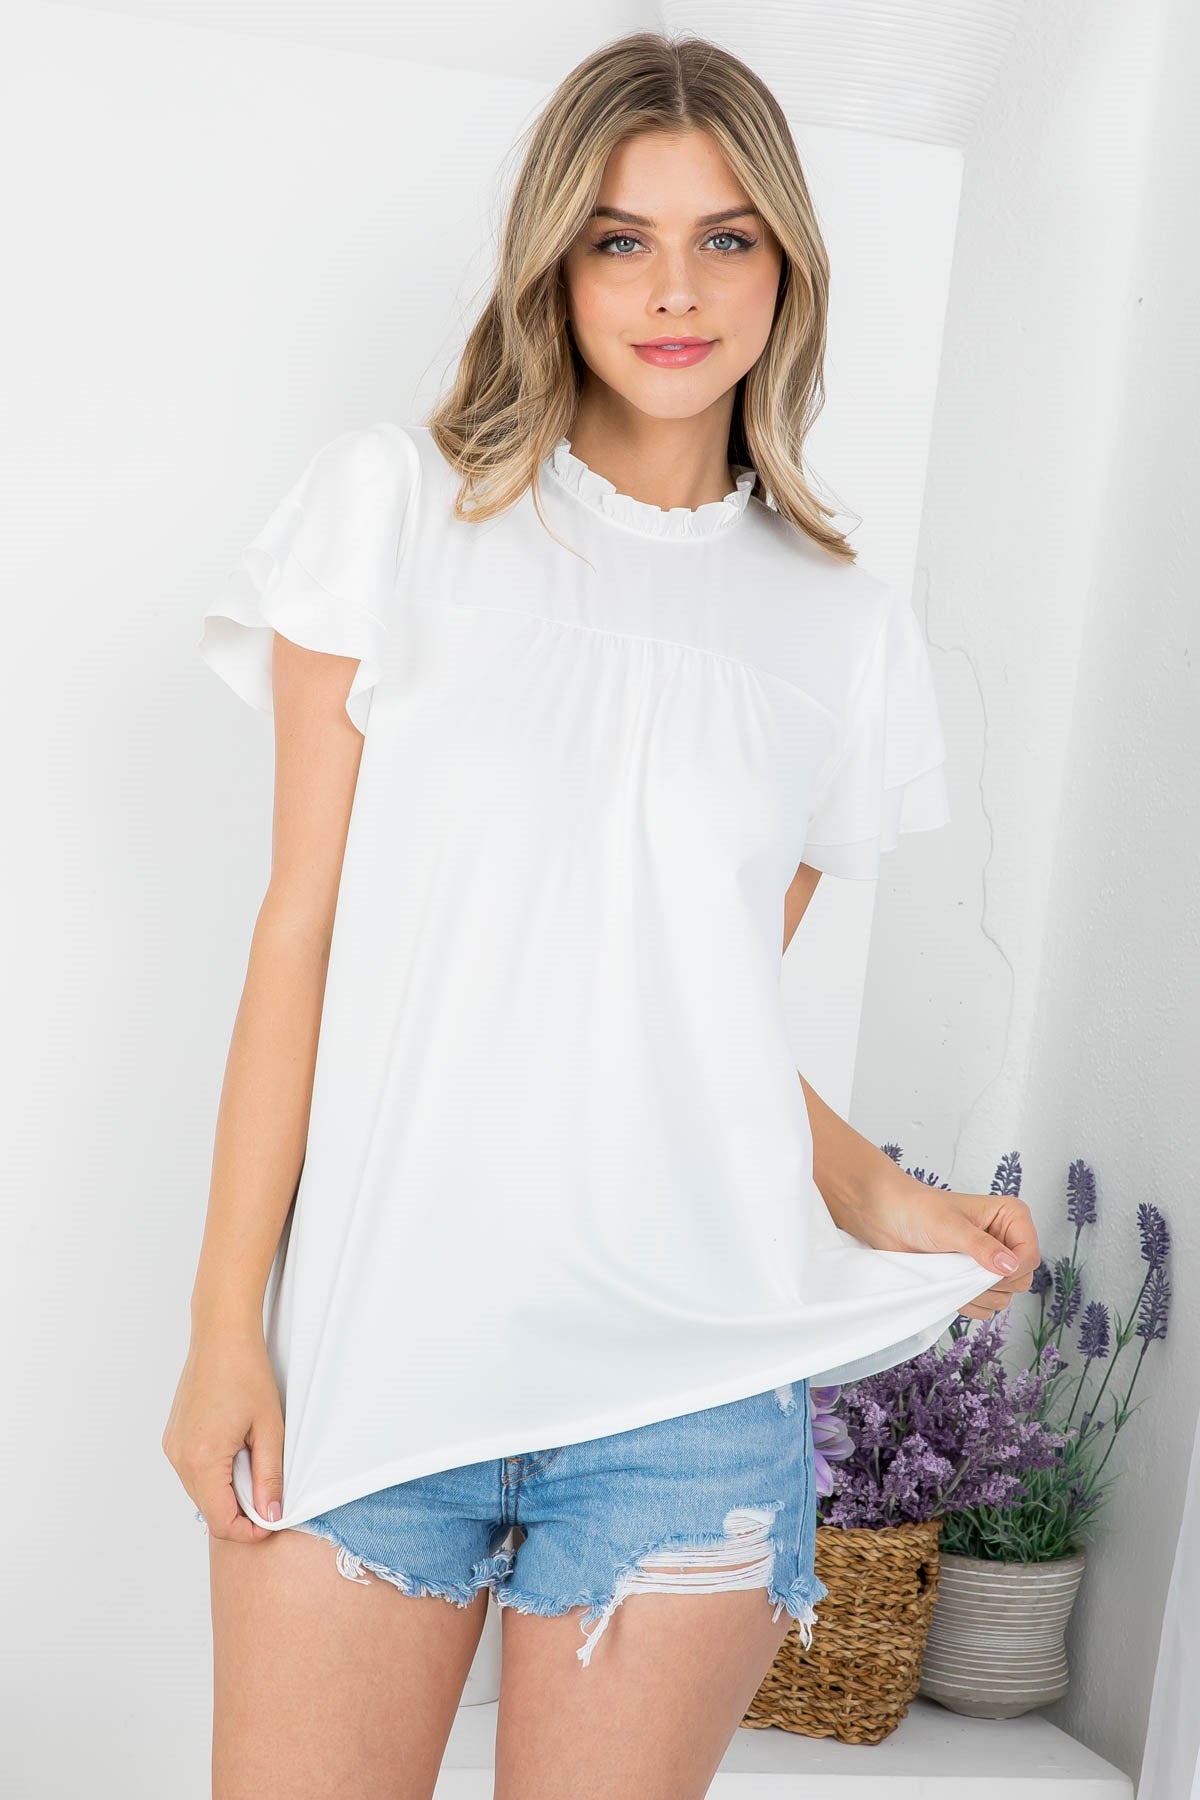 PLUS SIZE MERROW MOCK NECK LAYERED RUFFLE SLEEVE TOP 3-2-1 (NOW $4.75 ONLY!)